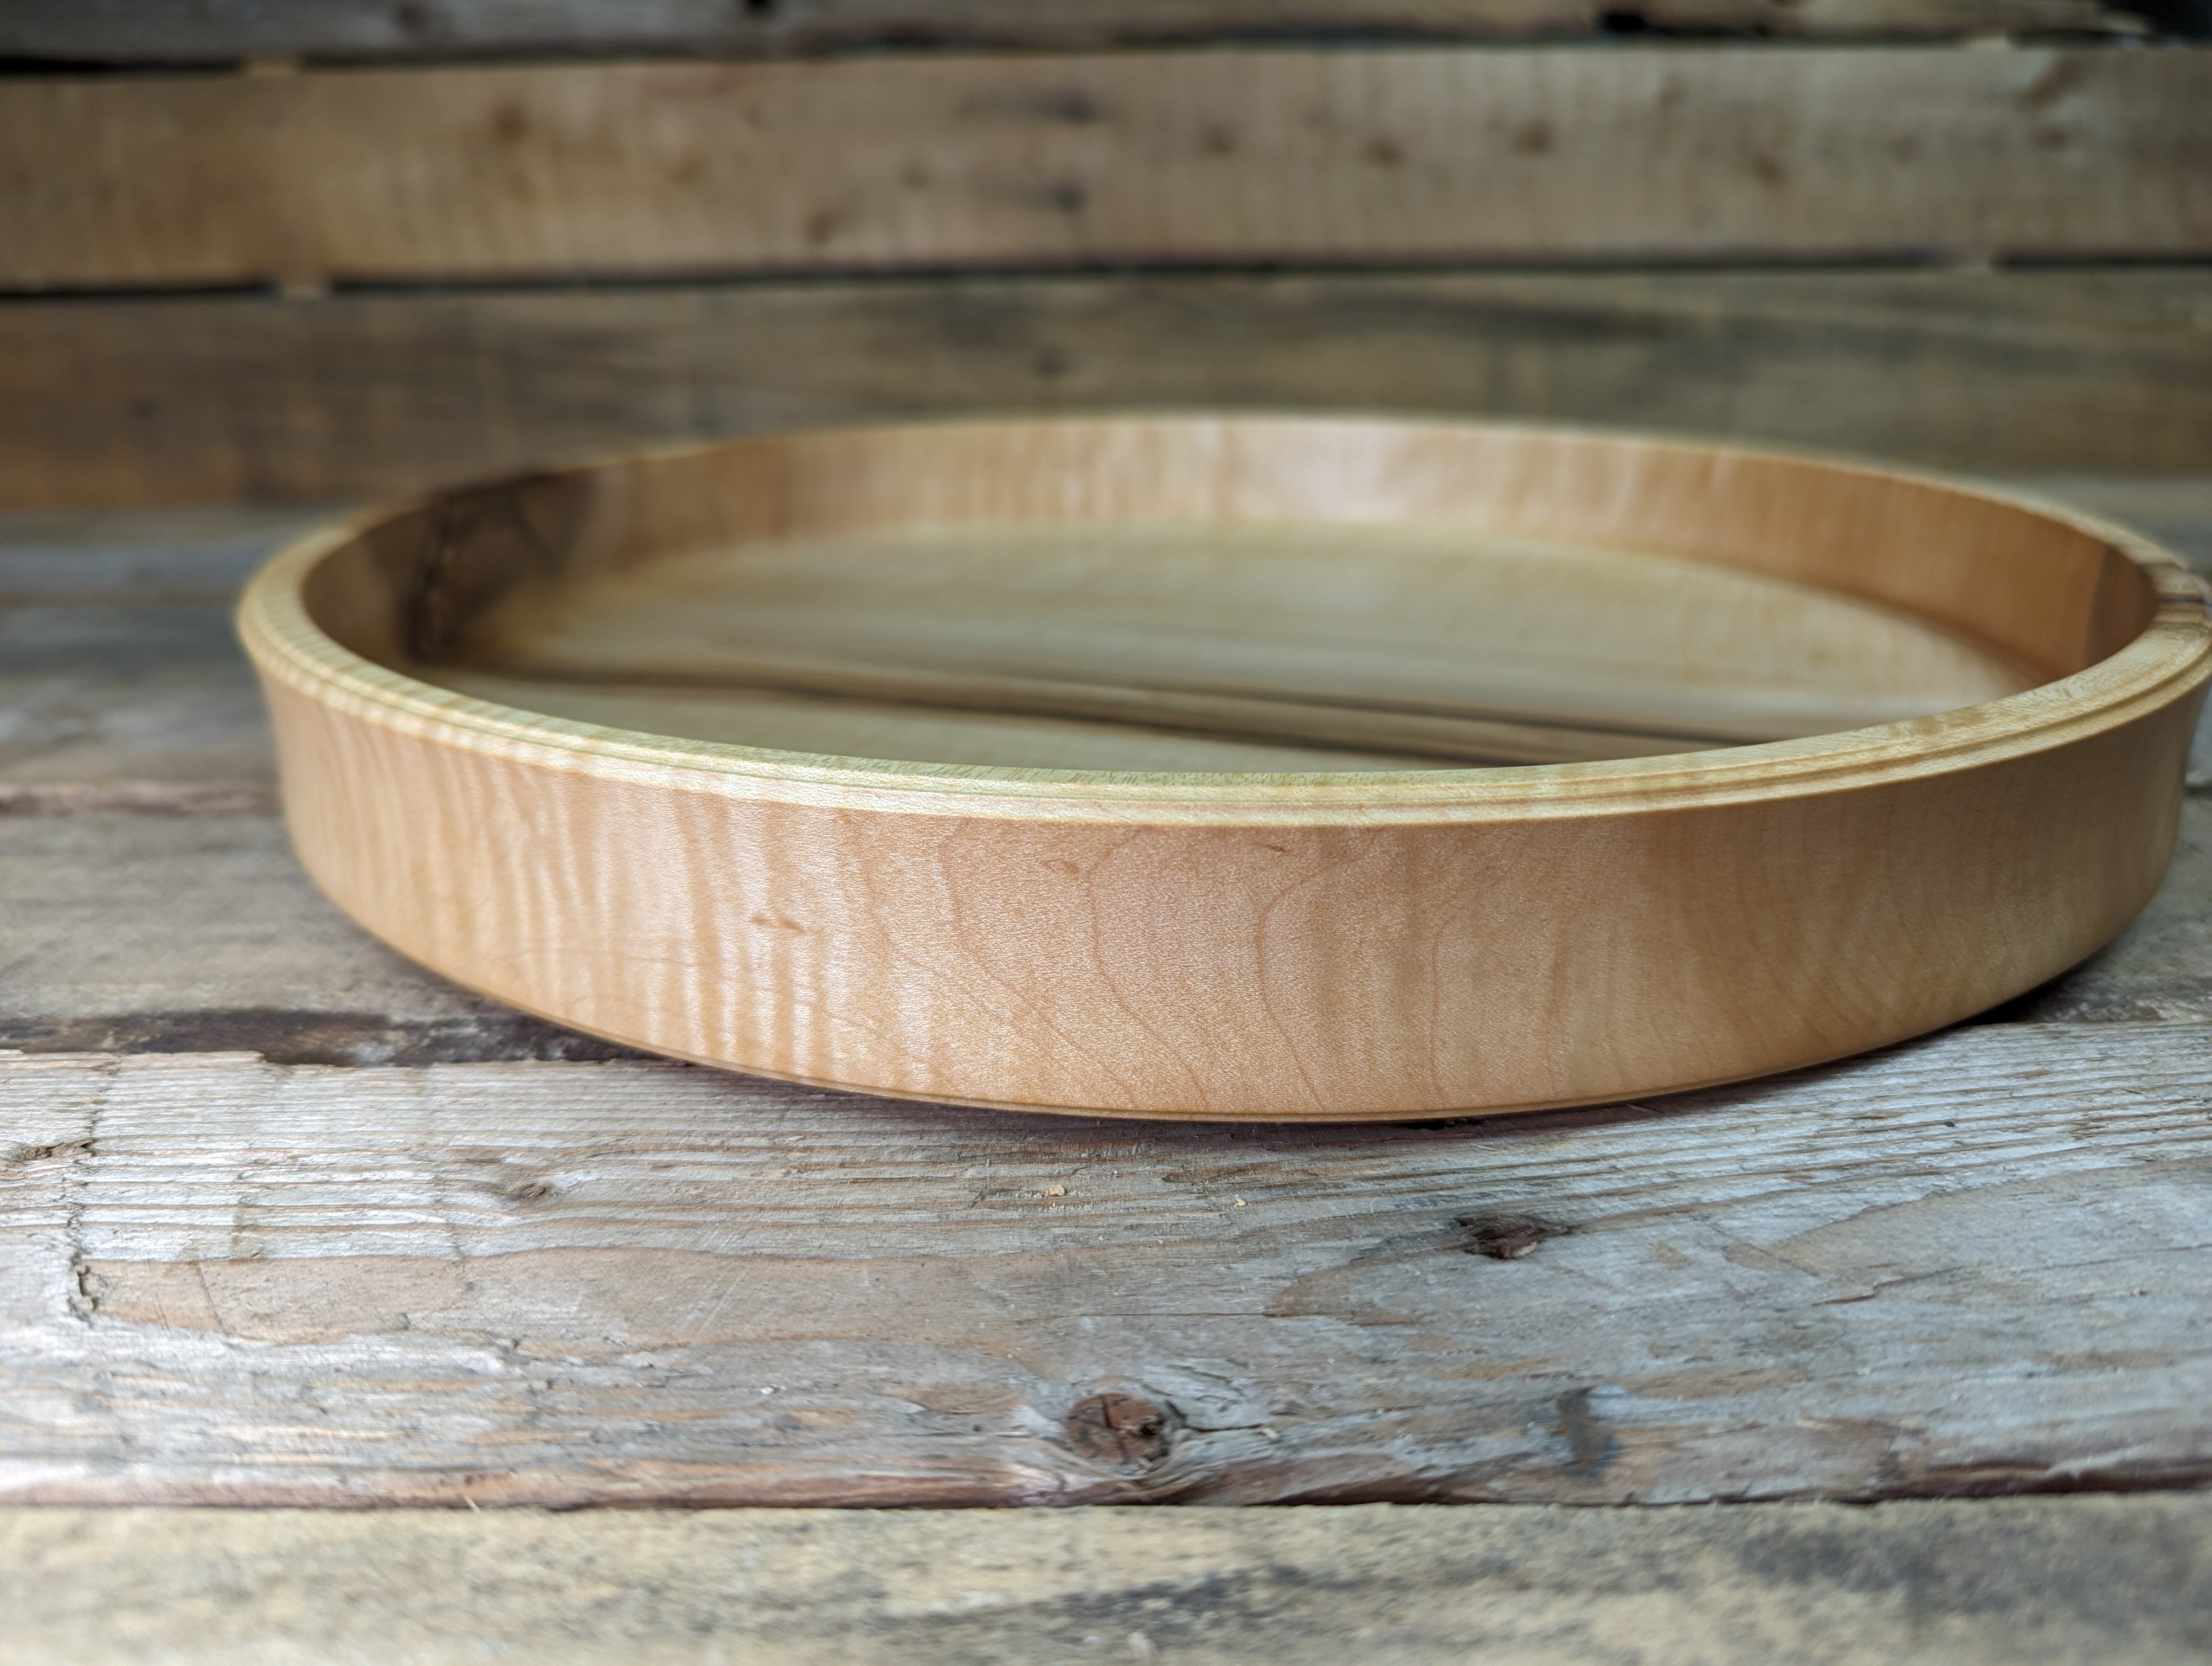 Figured maple serving tray